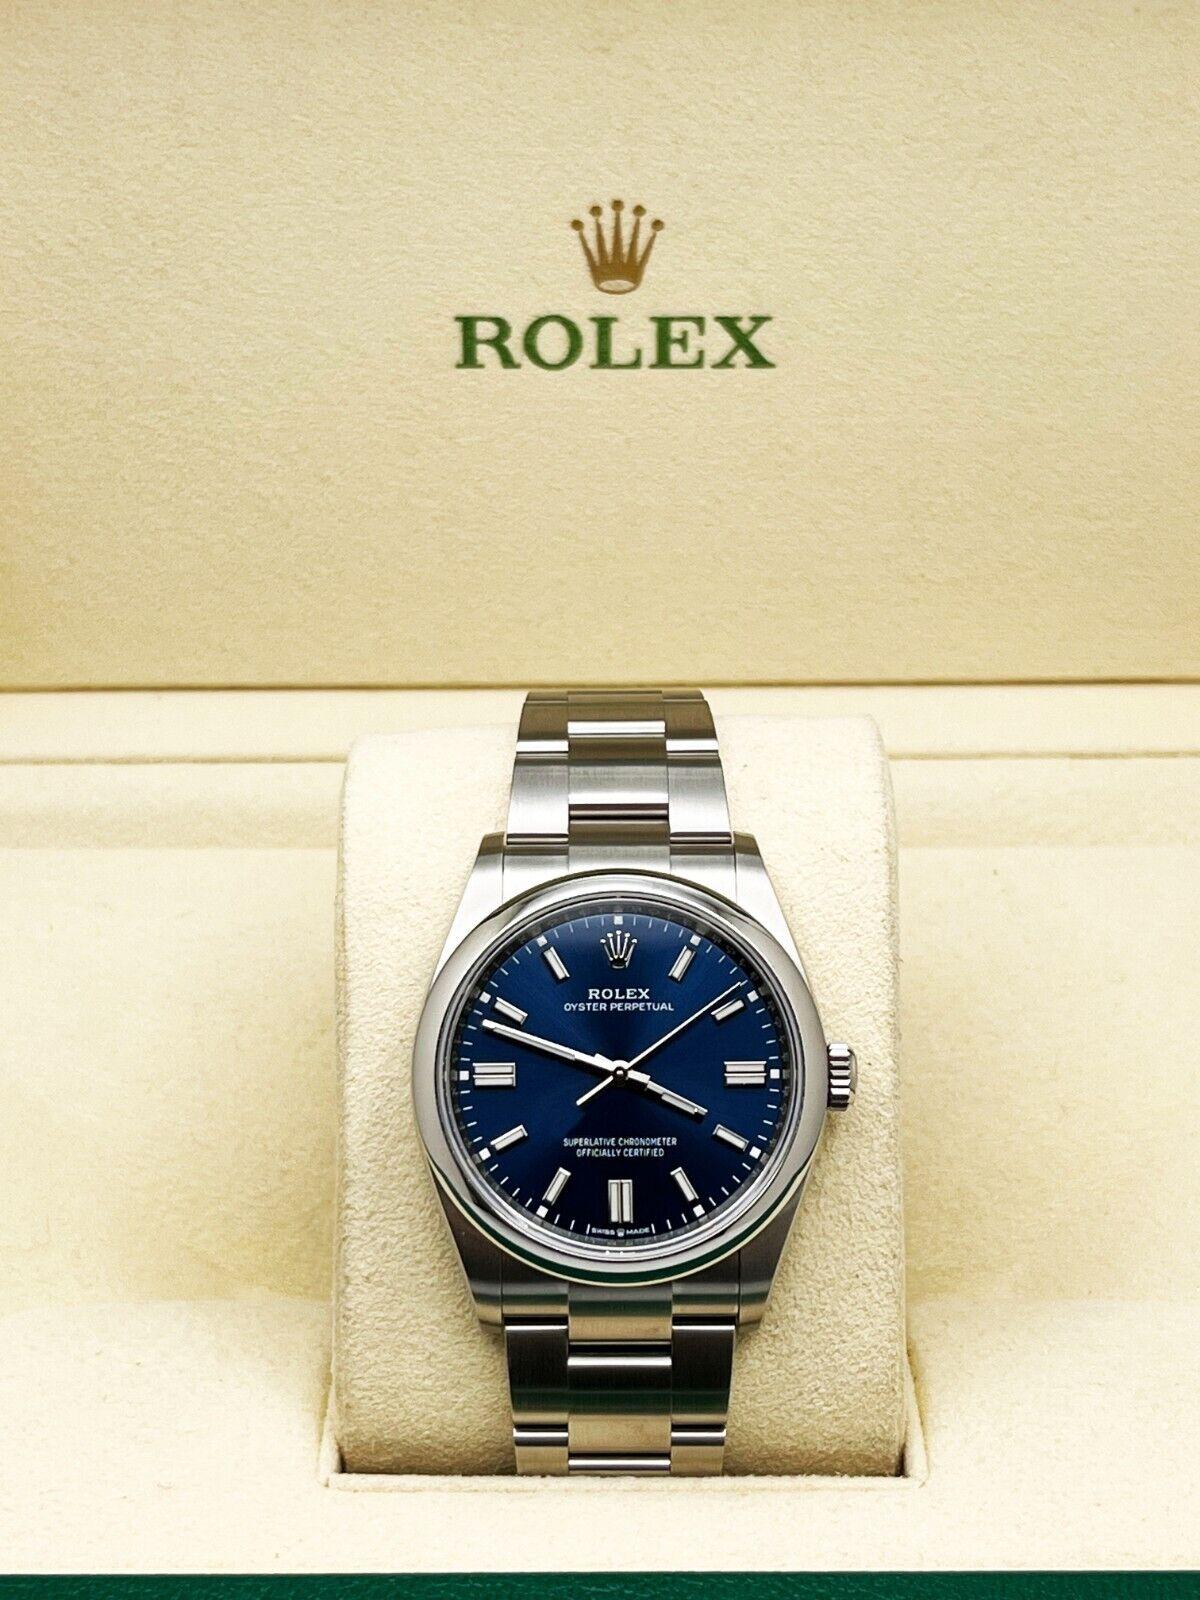 Rolex 126000 Oyster Perpetual 36mm Blue Dial Stainless Steel Box Paper 2021 In Excellent Condition For Sale In San Diego, CA